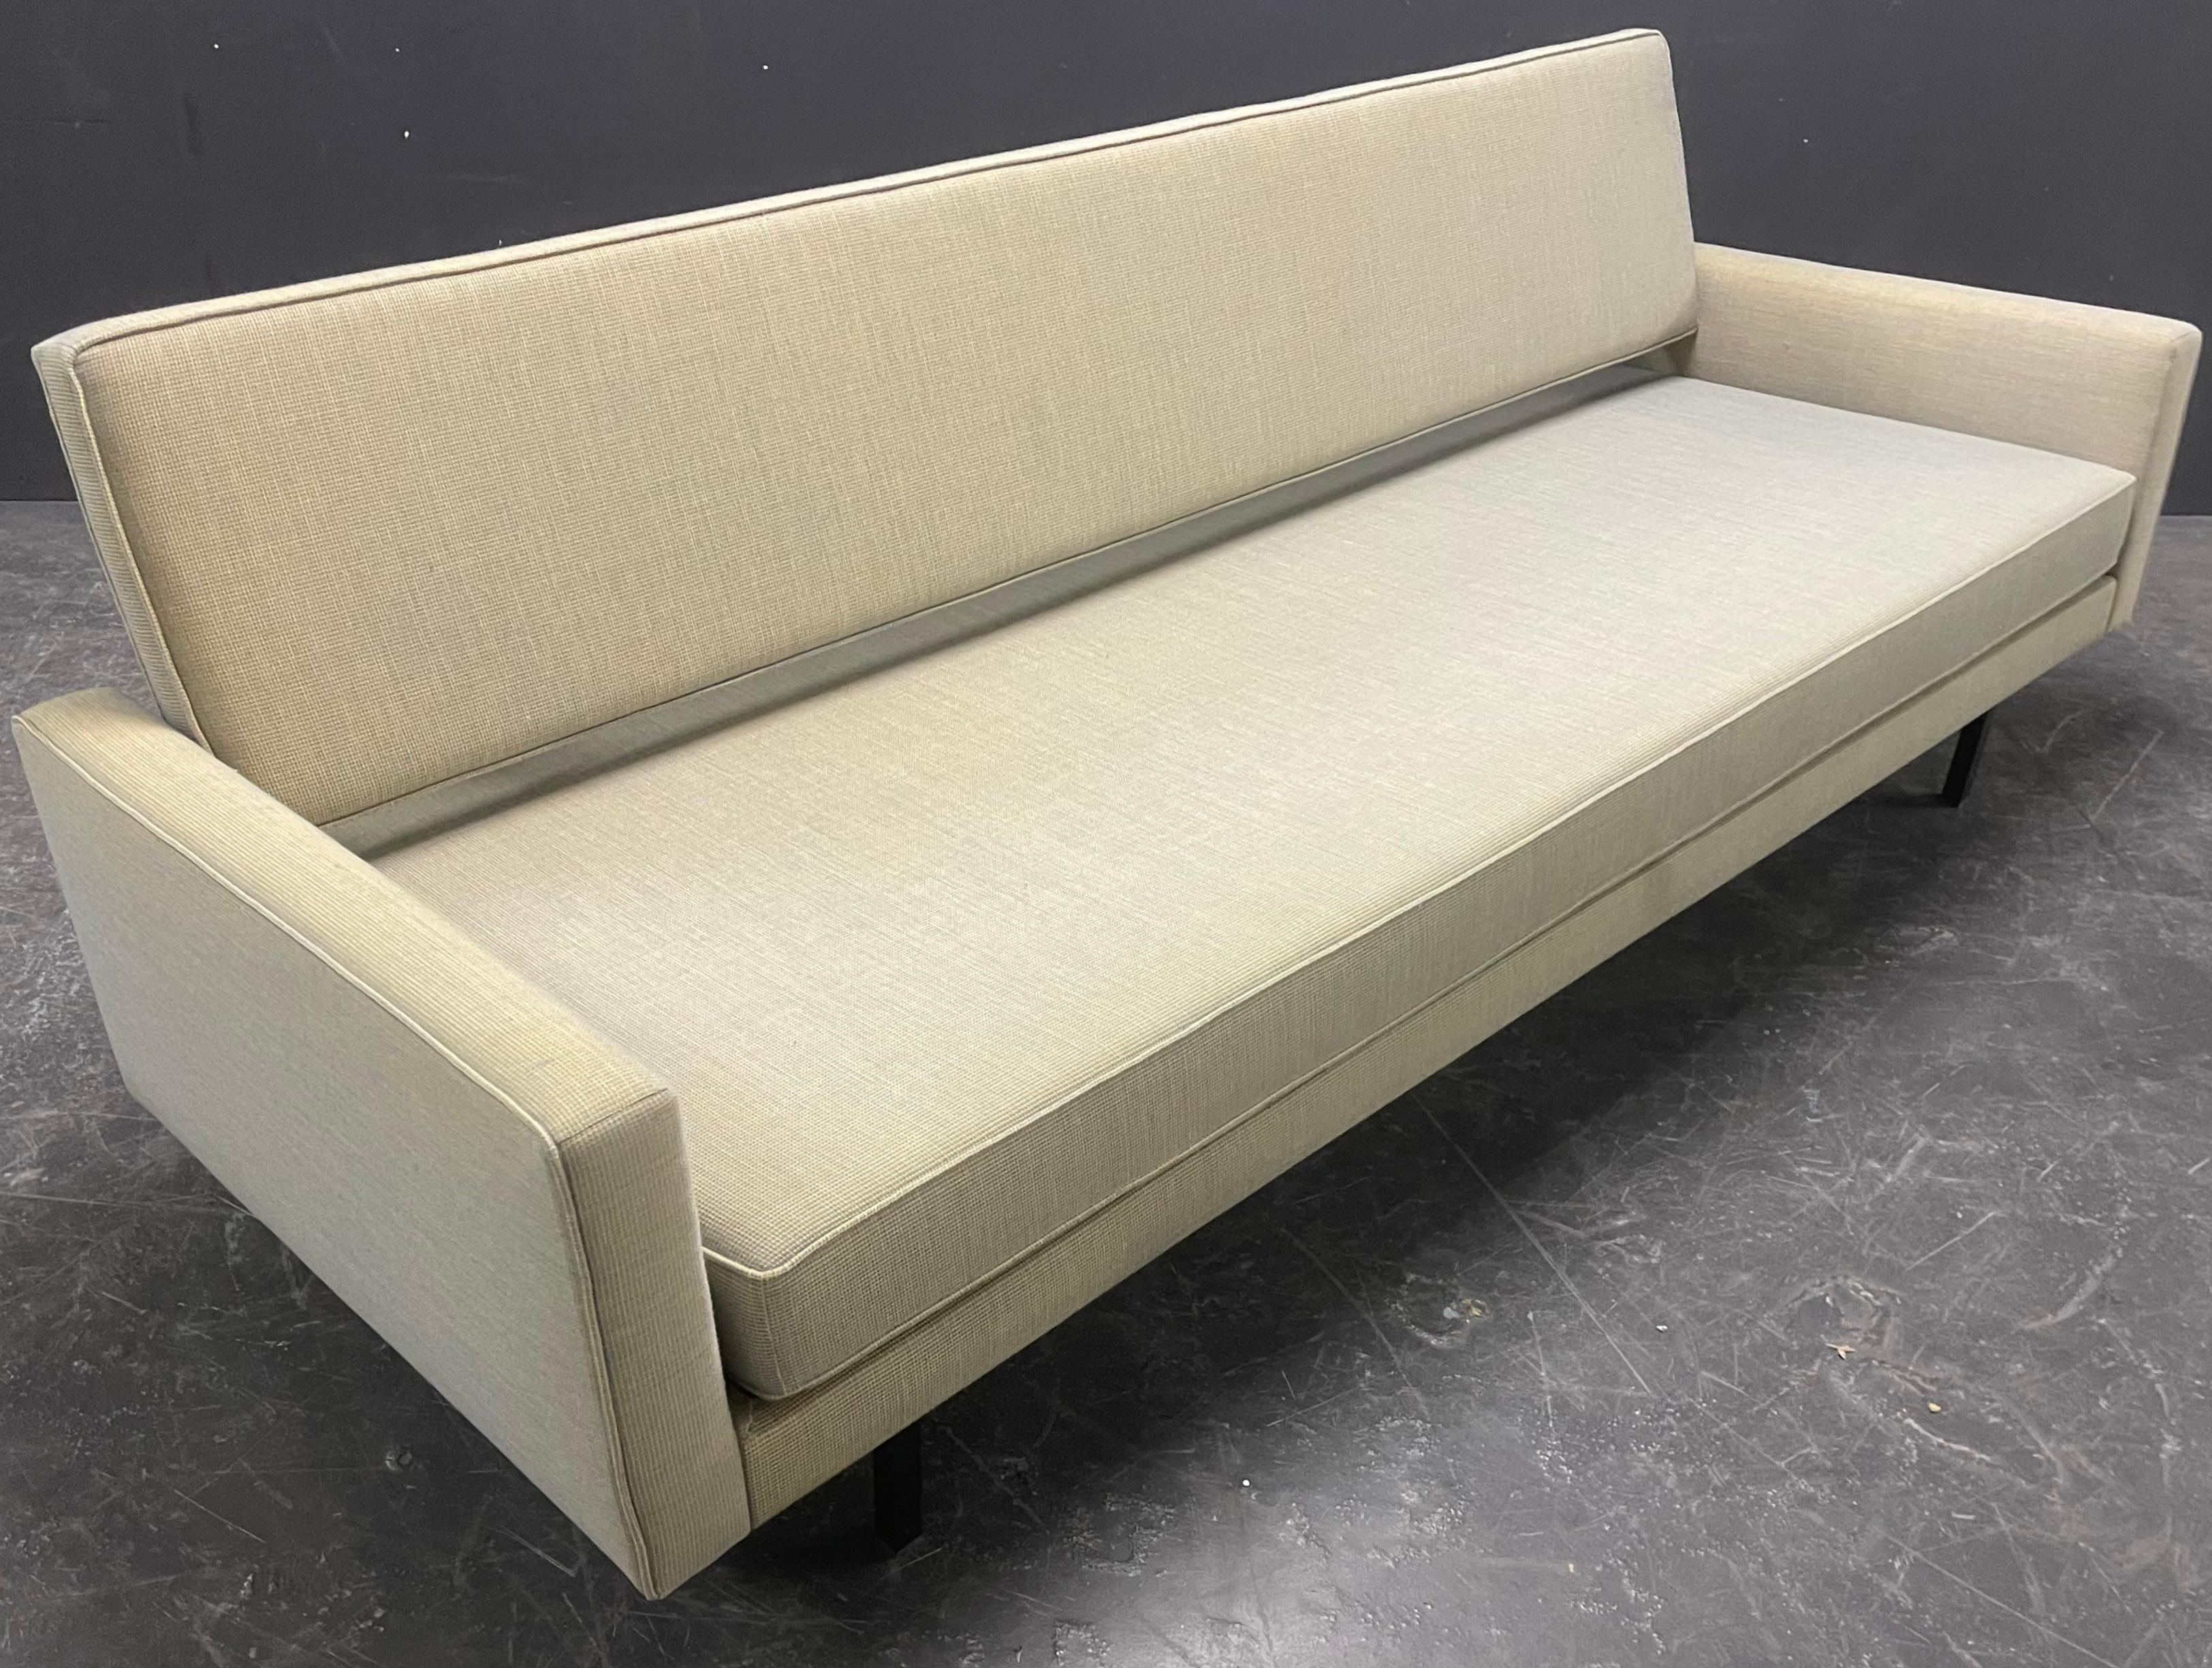 Rare No. 704 Richard Schultz Knoll International Daybed / Sofa For Sale 8